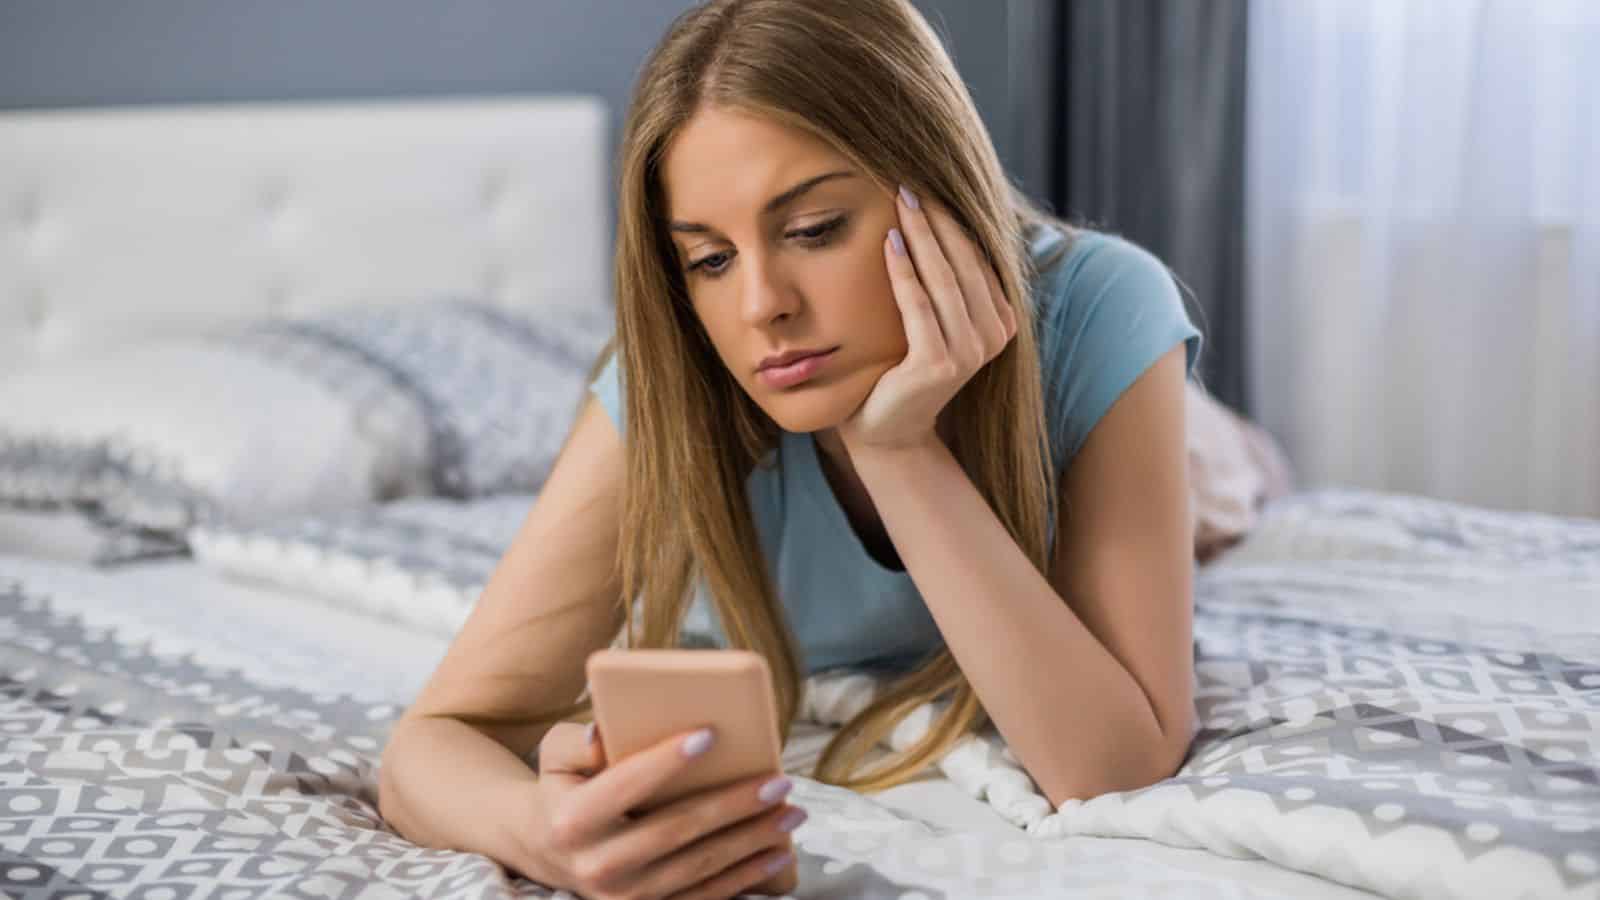 Sad woman holding phone while lying down on bed in her bedroom